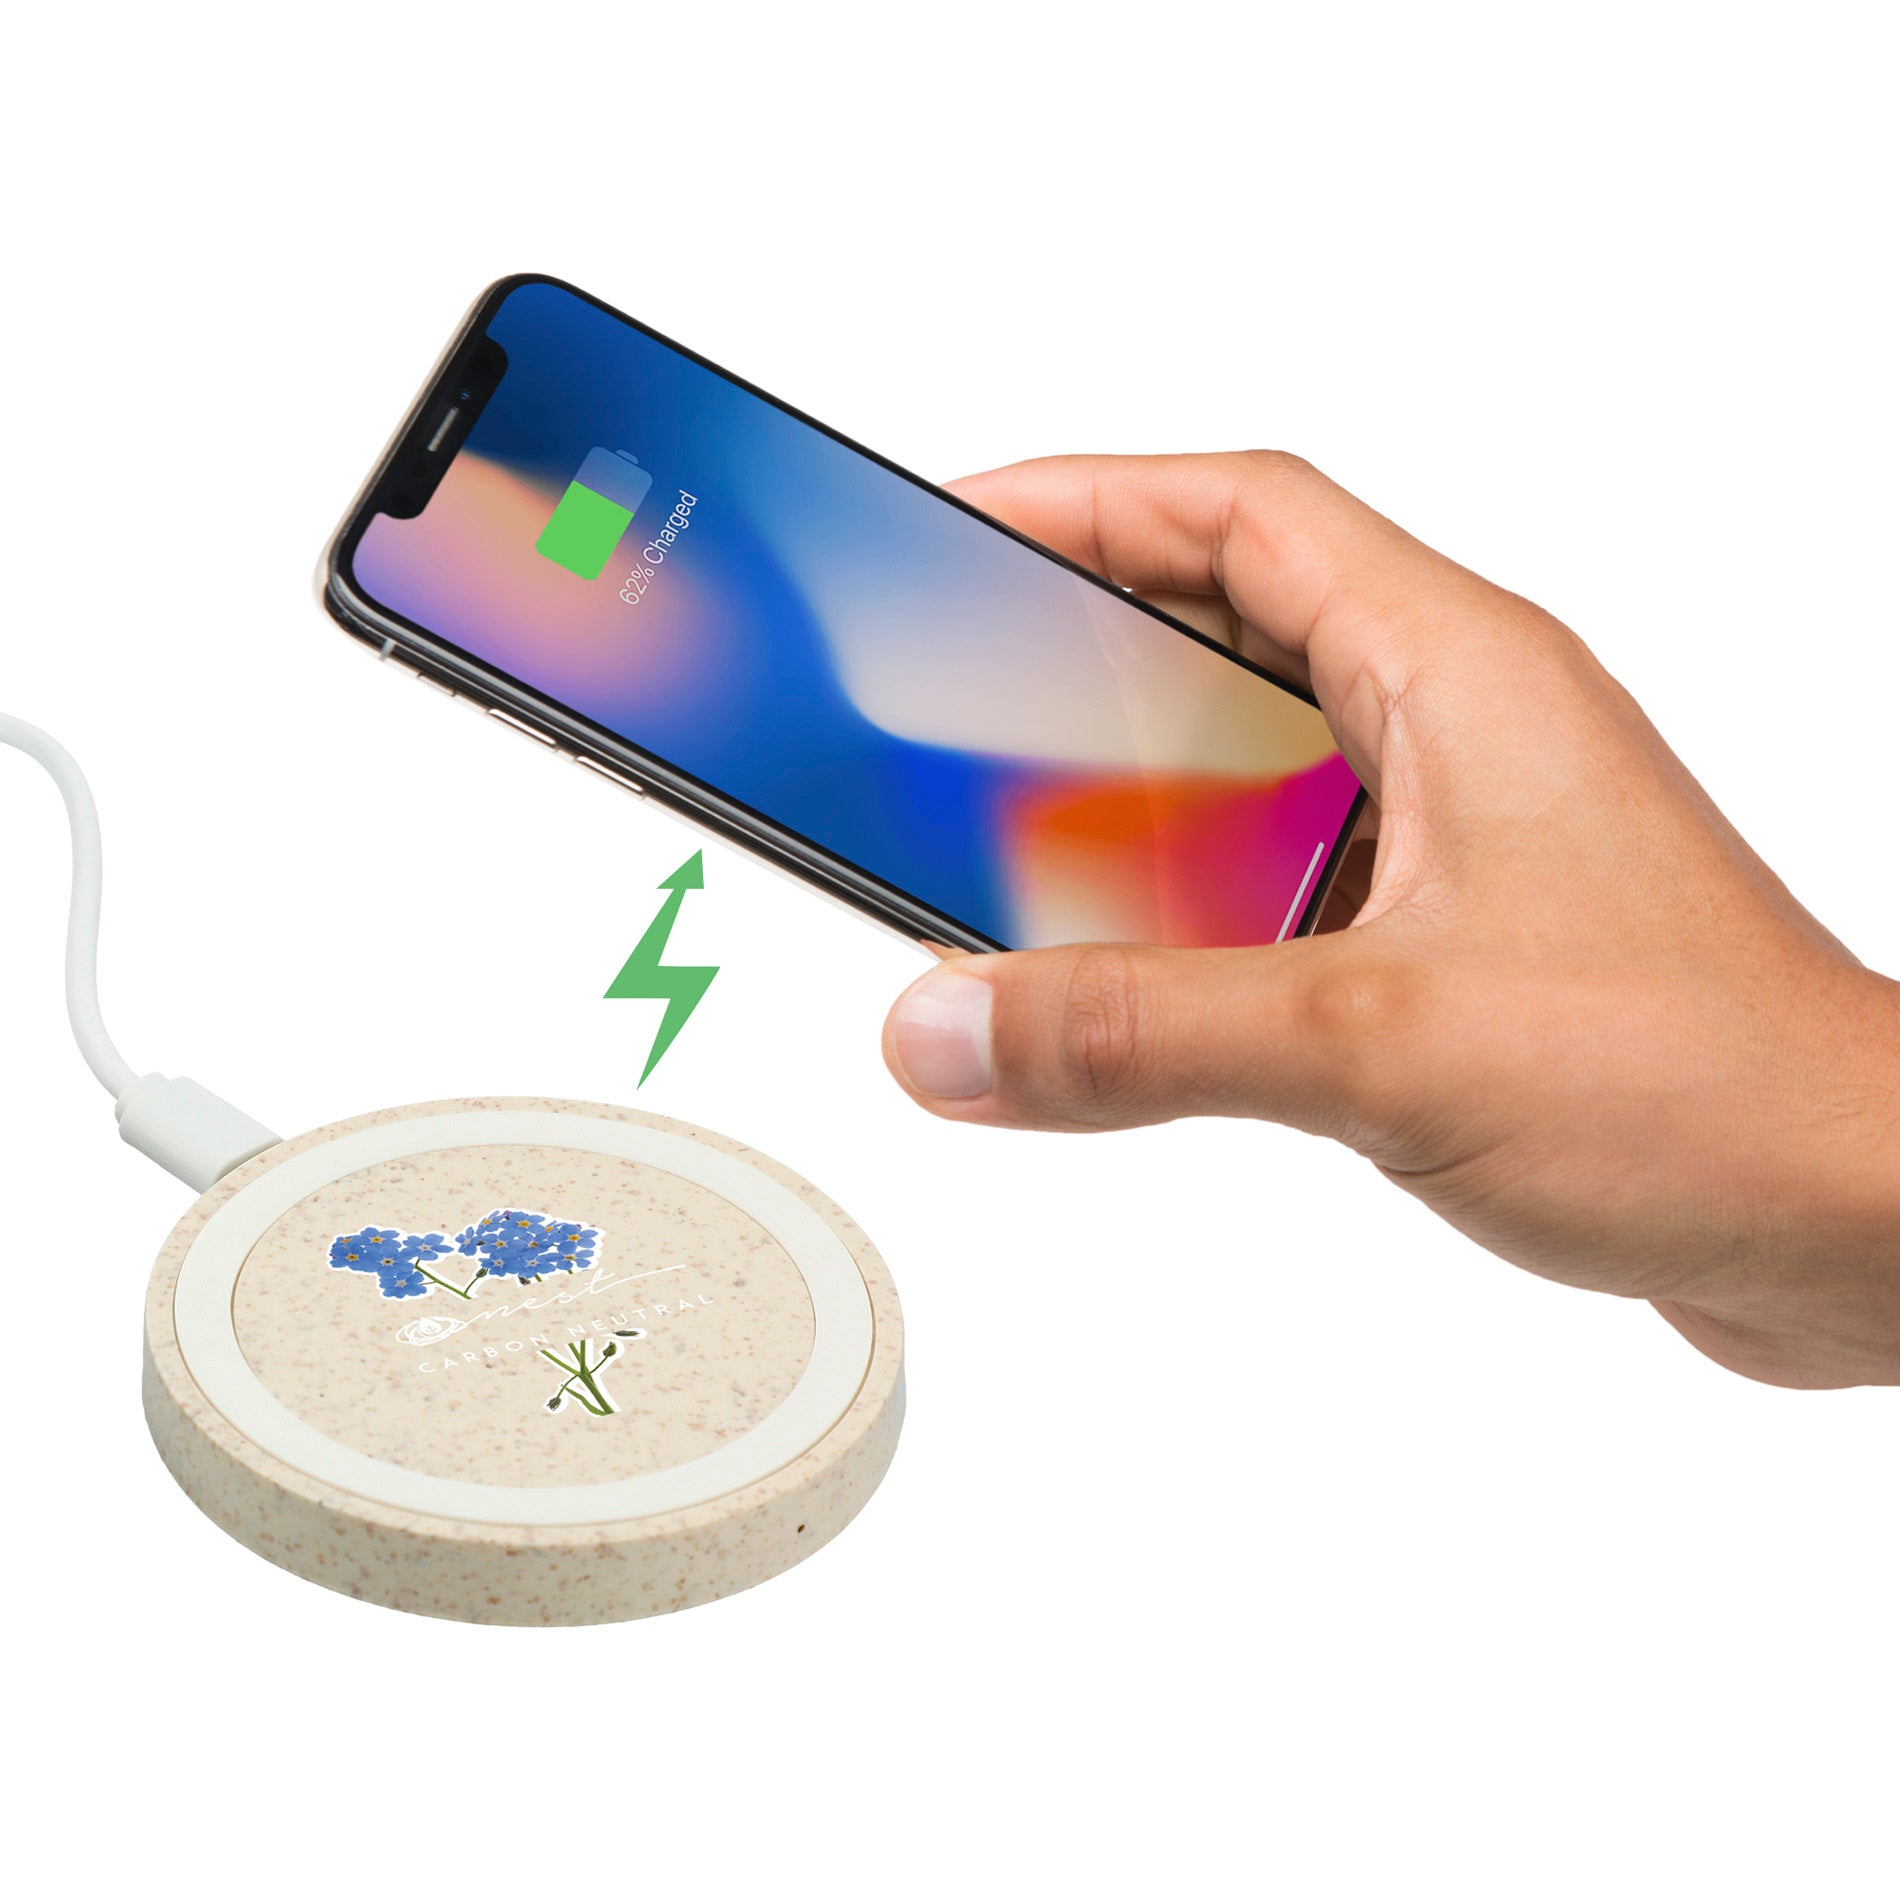 7141-11 Quake Wireless Charging Pad Leed's Promotional Products